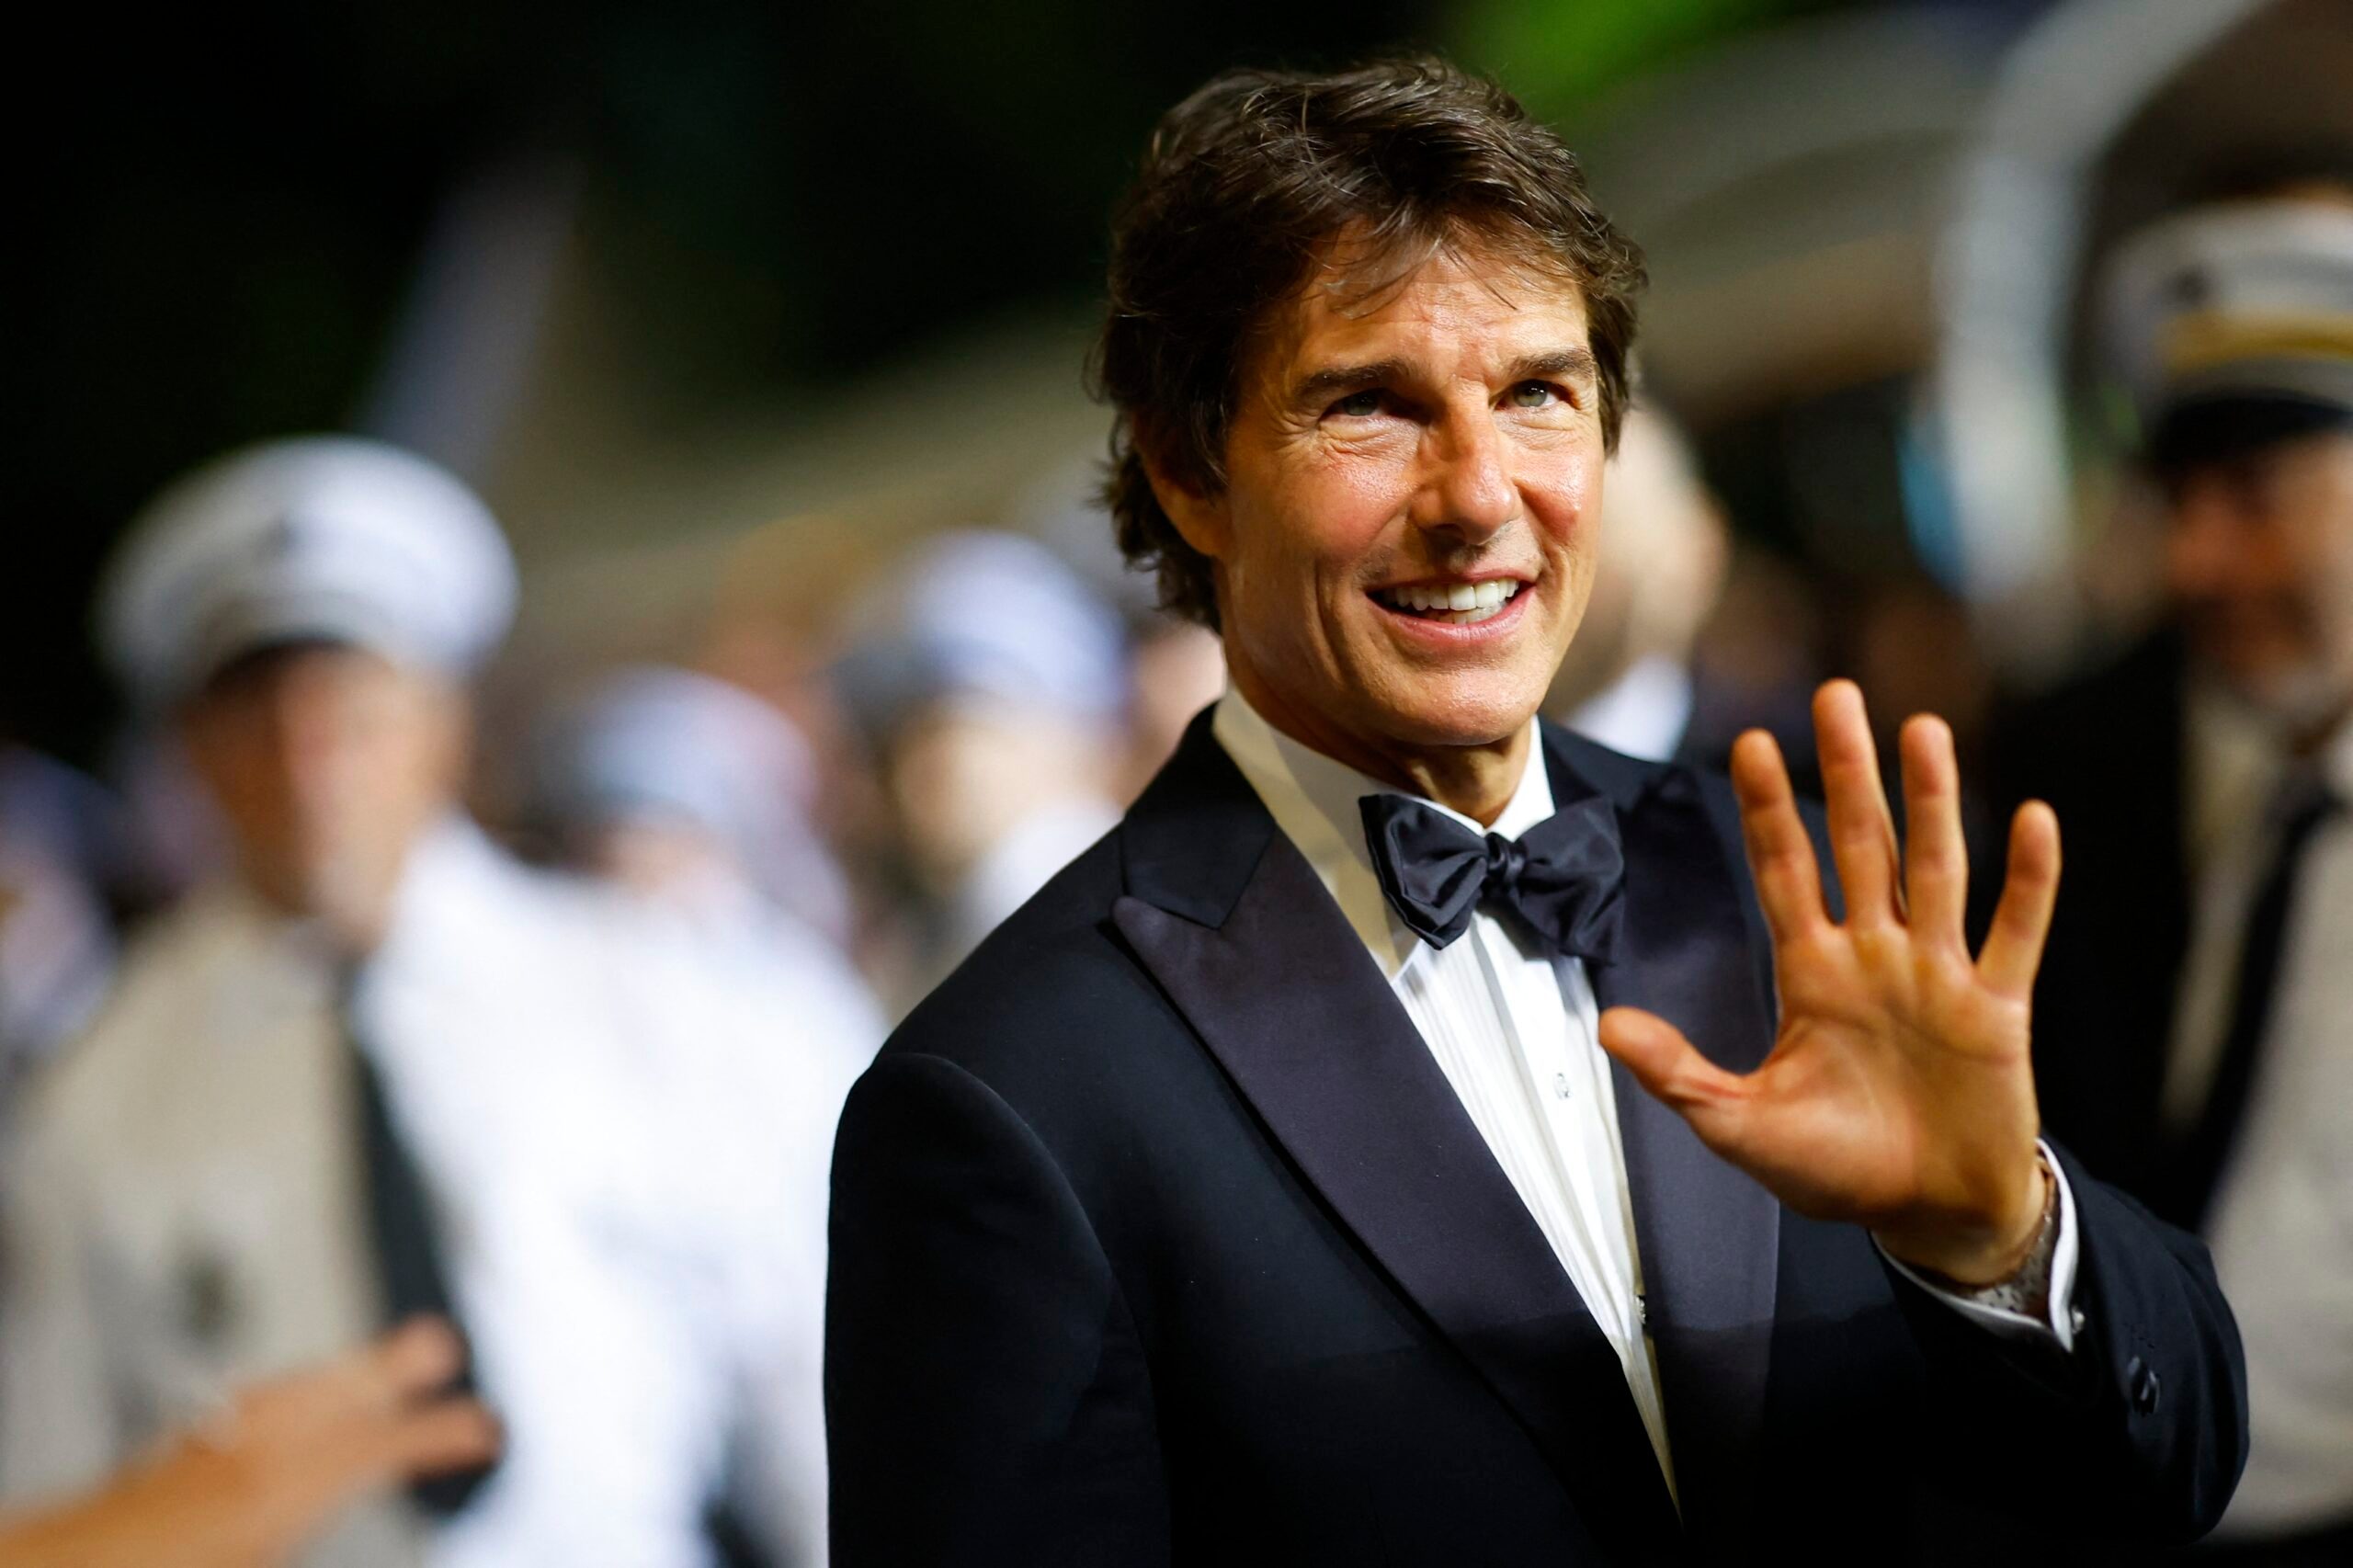 Tom Cruise swoops into Cannes, igniting film festival with jets and star power